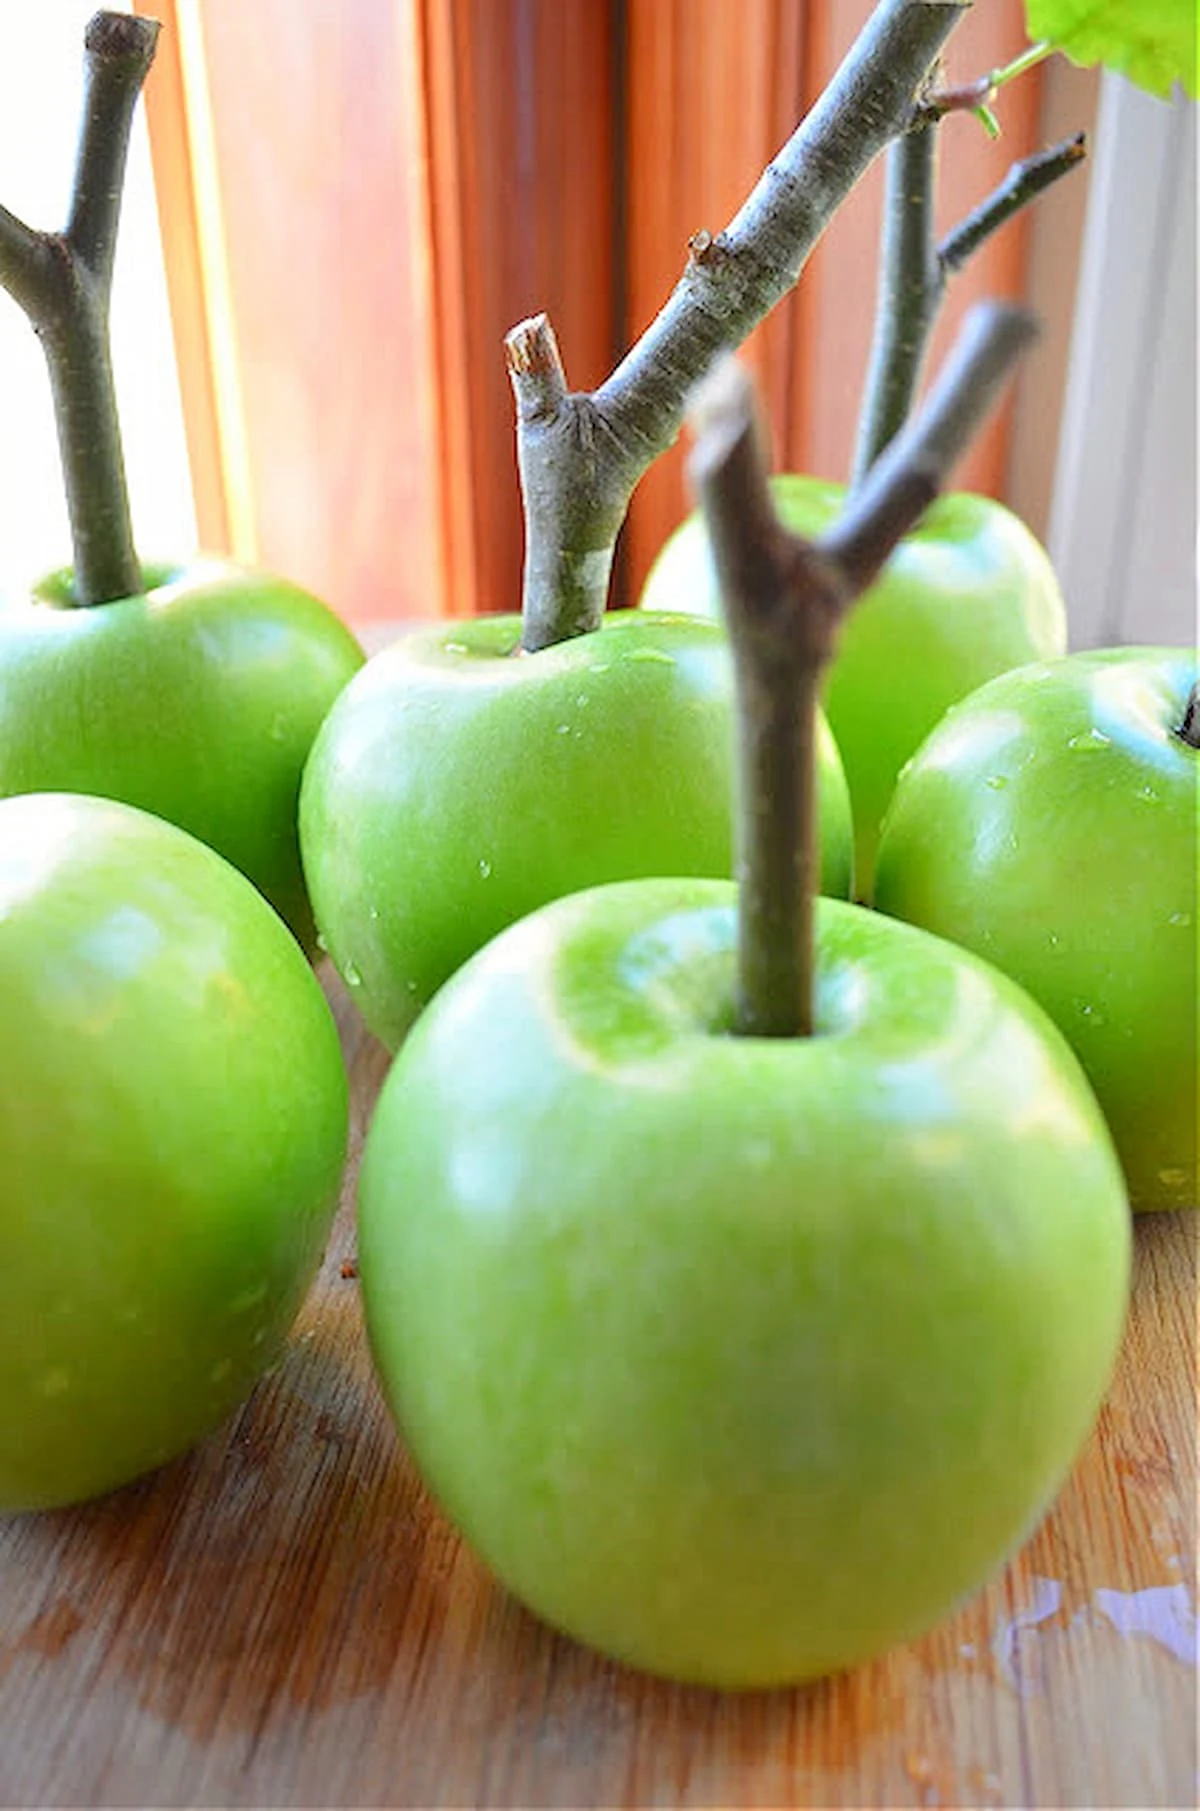 Apples with a Apple Twig in the center on a wooden cutting board.